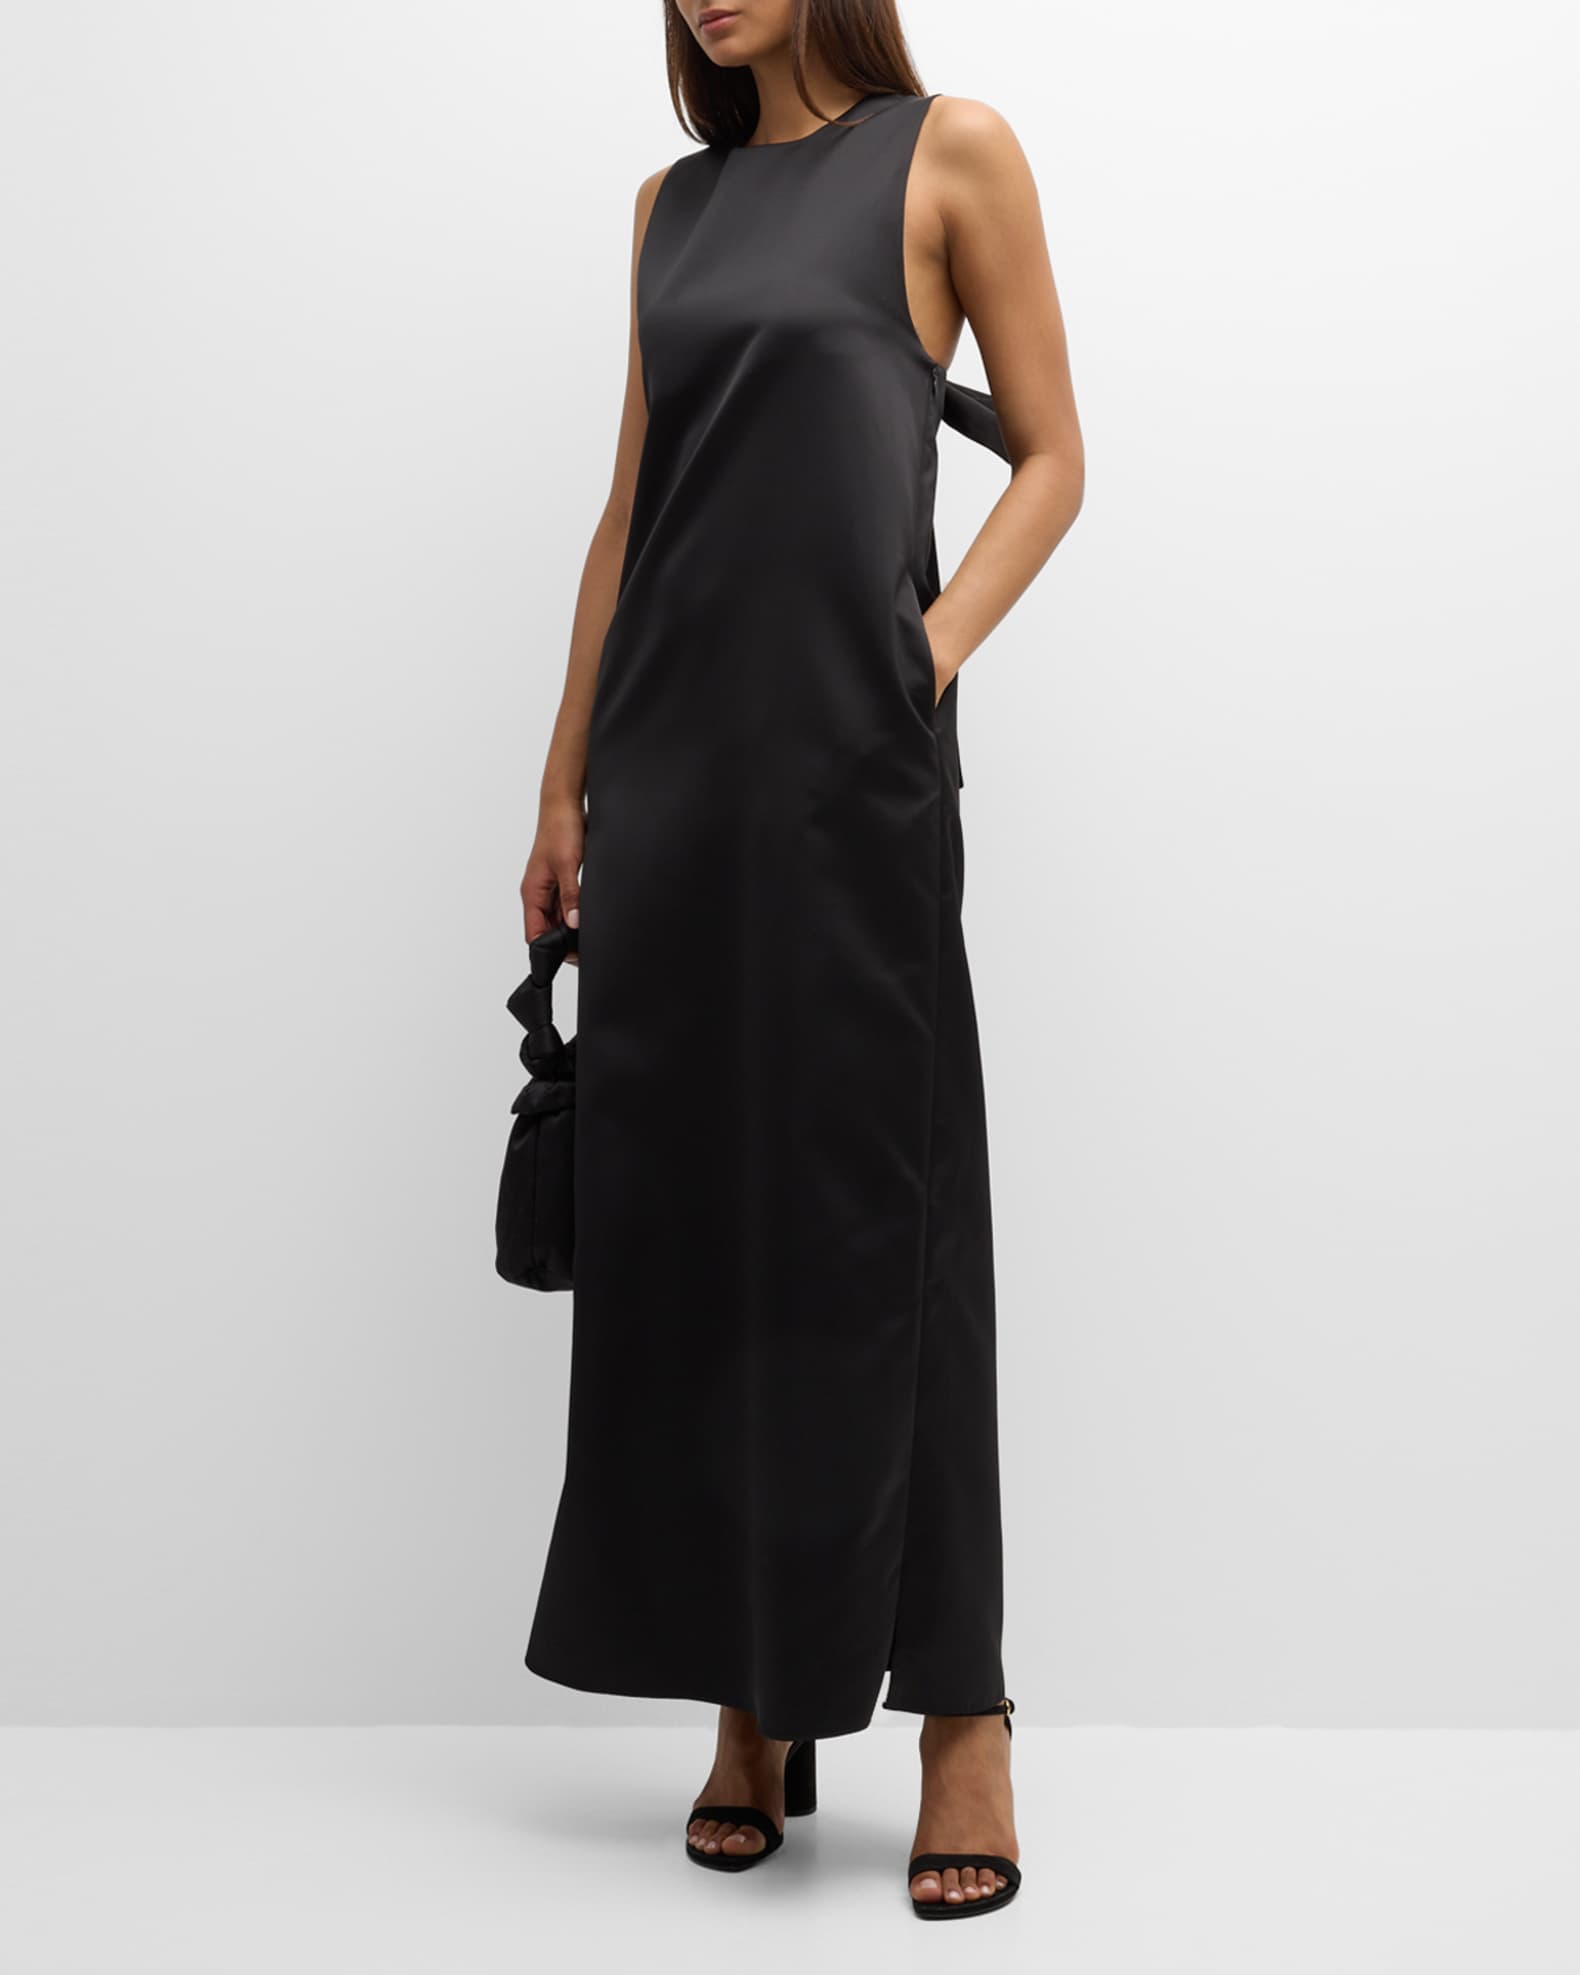 Co Knotted Long Satin Dress | Neiman Marcus